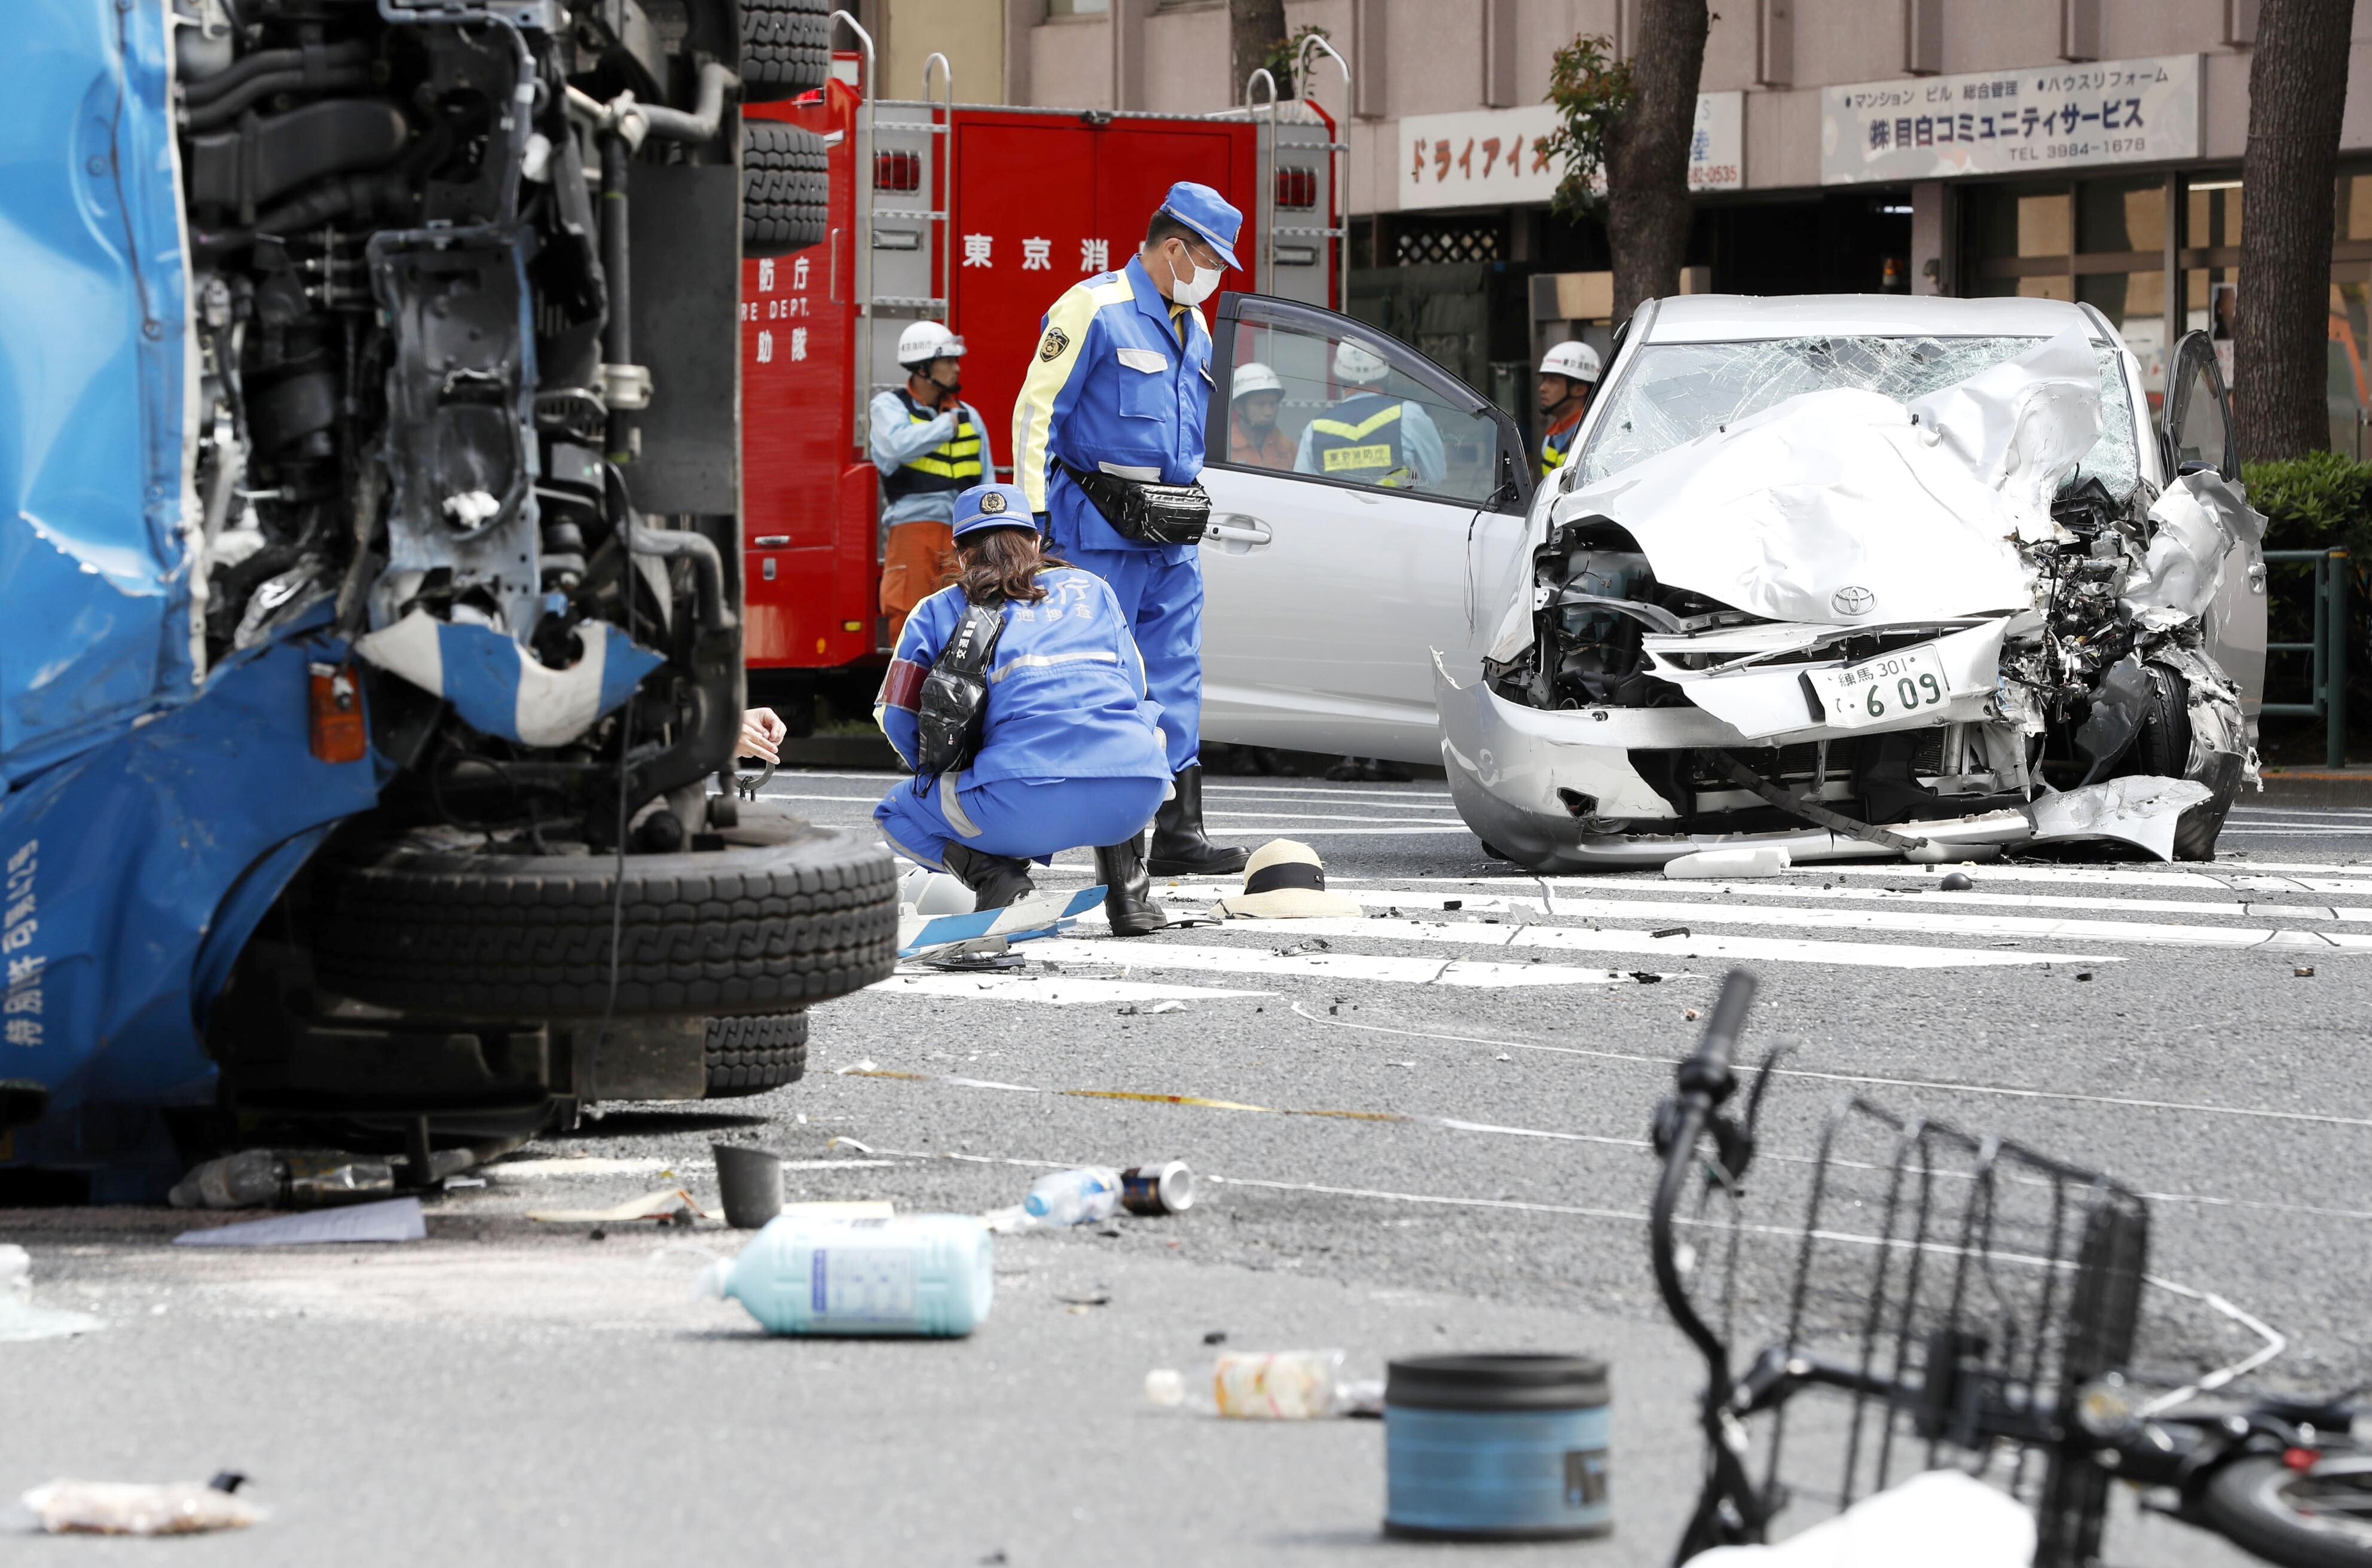 Police officers inspect the scene of a car accident in 2019 in which an elderly driver smashed into pedestrians at a Tokyo intersection, killing a woman and a girl on a bicycle and overturning a garbage truck. Photo: Kyodo